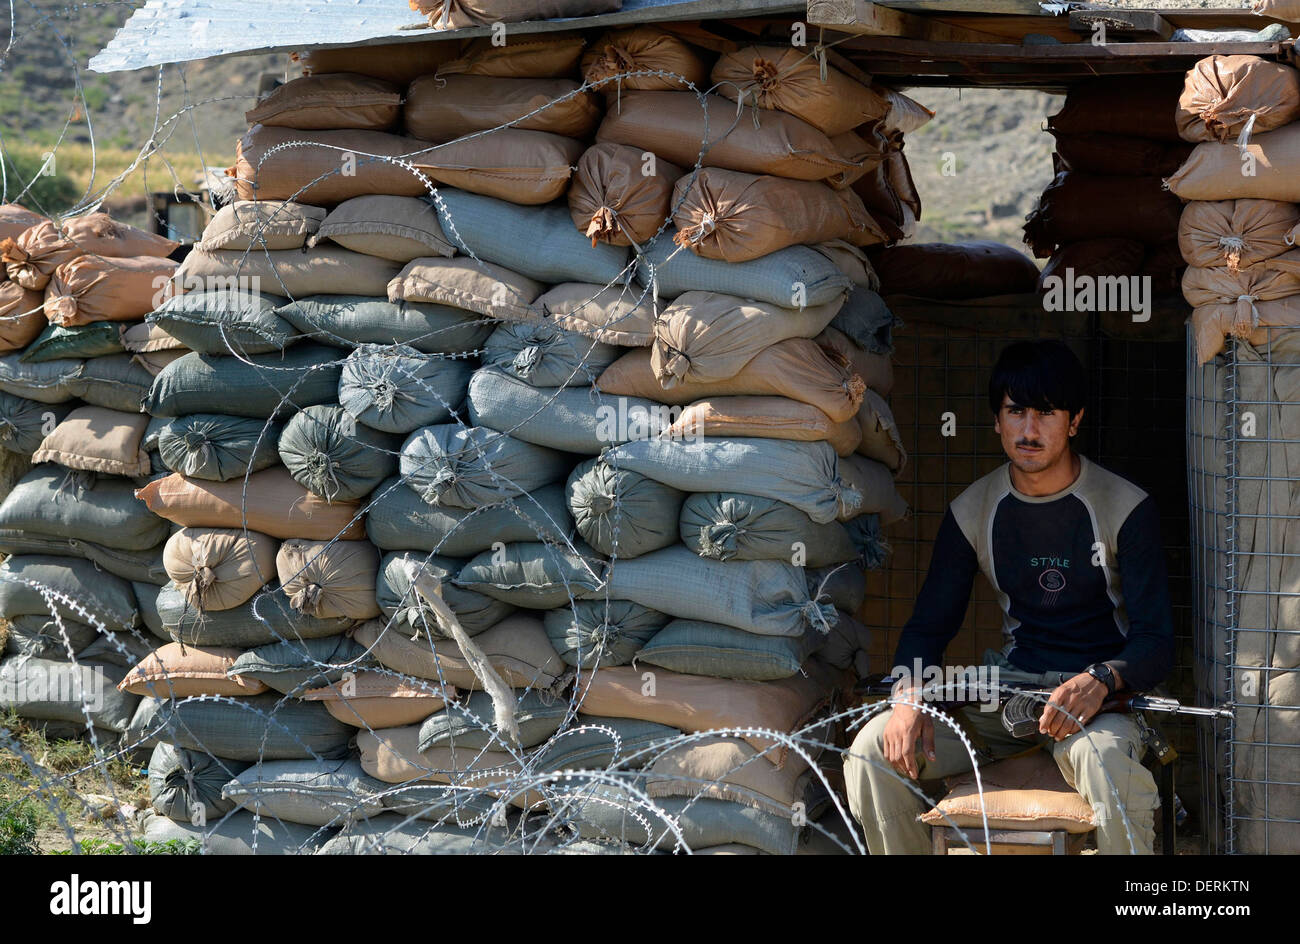 An Afghan Local Police officer sits in a bunker at a roadside checkpoint during a clearing operation September 20, 2013 in Sirkanay district, Kunar province, Afghanistan. Stock Photo